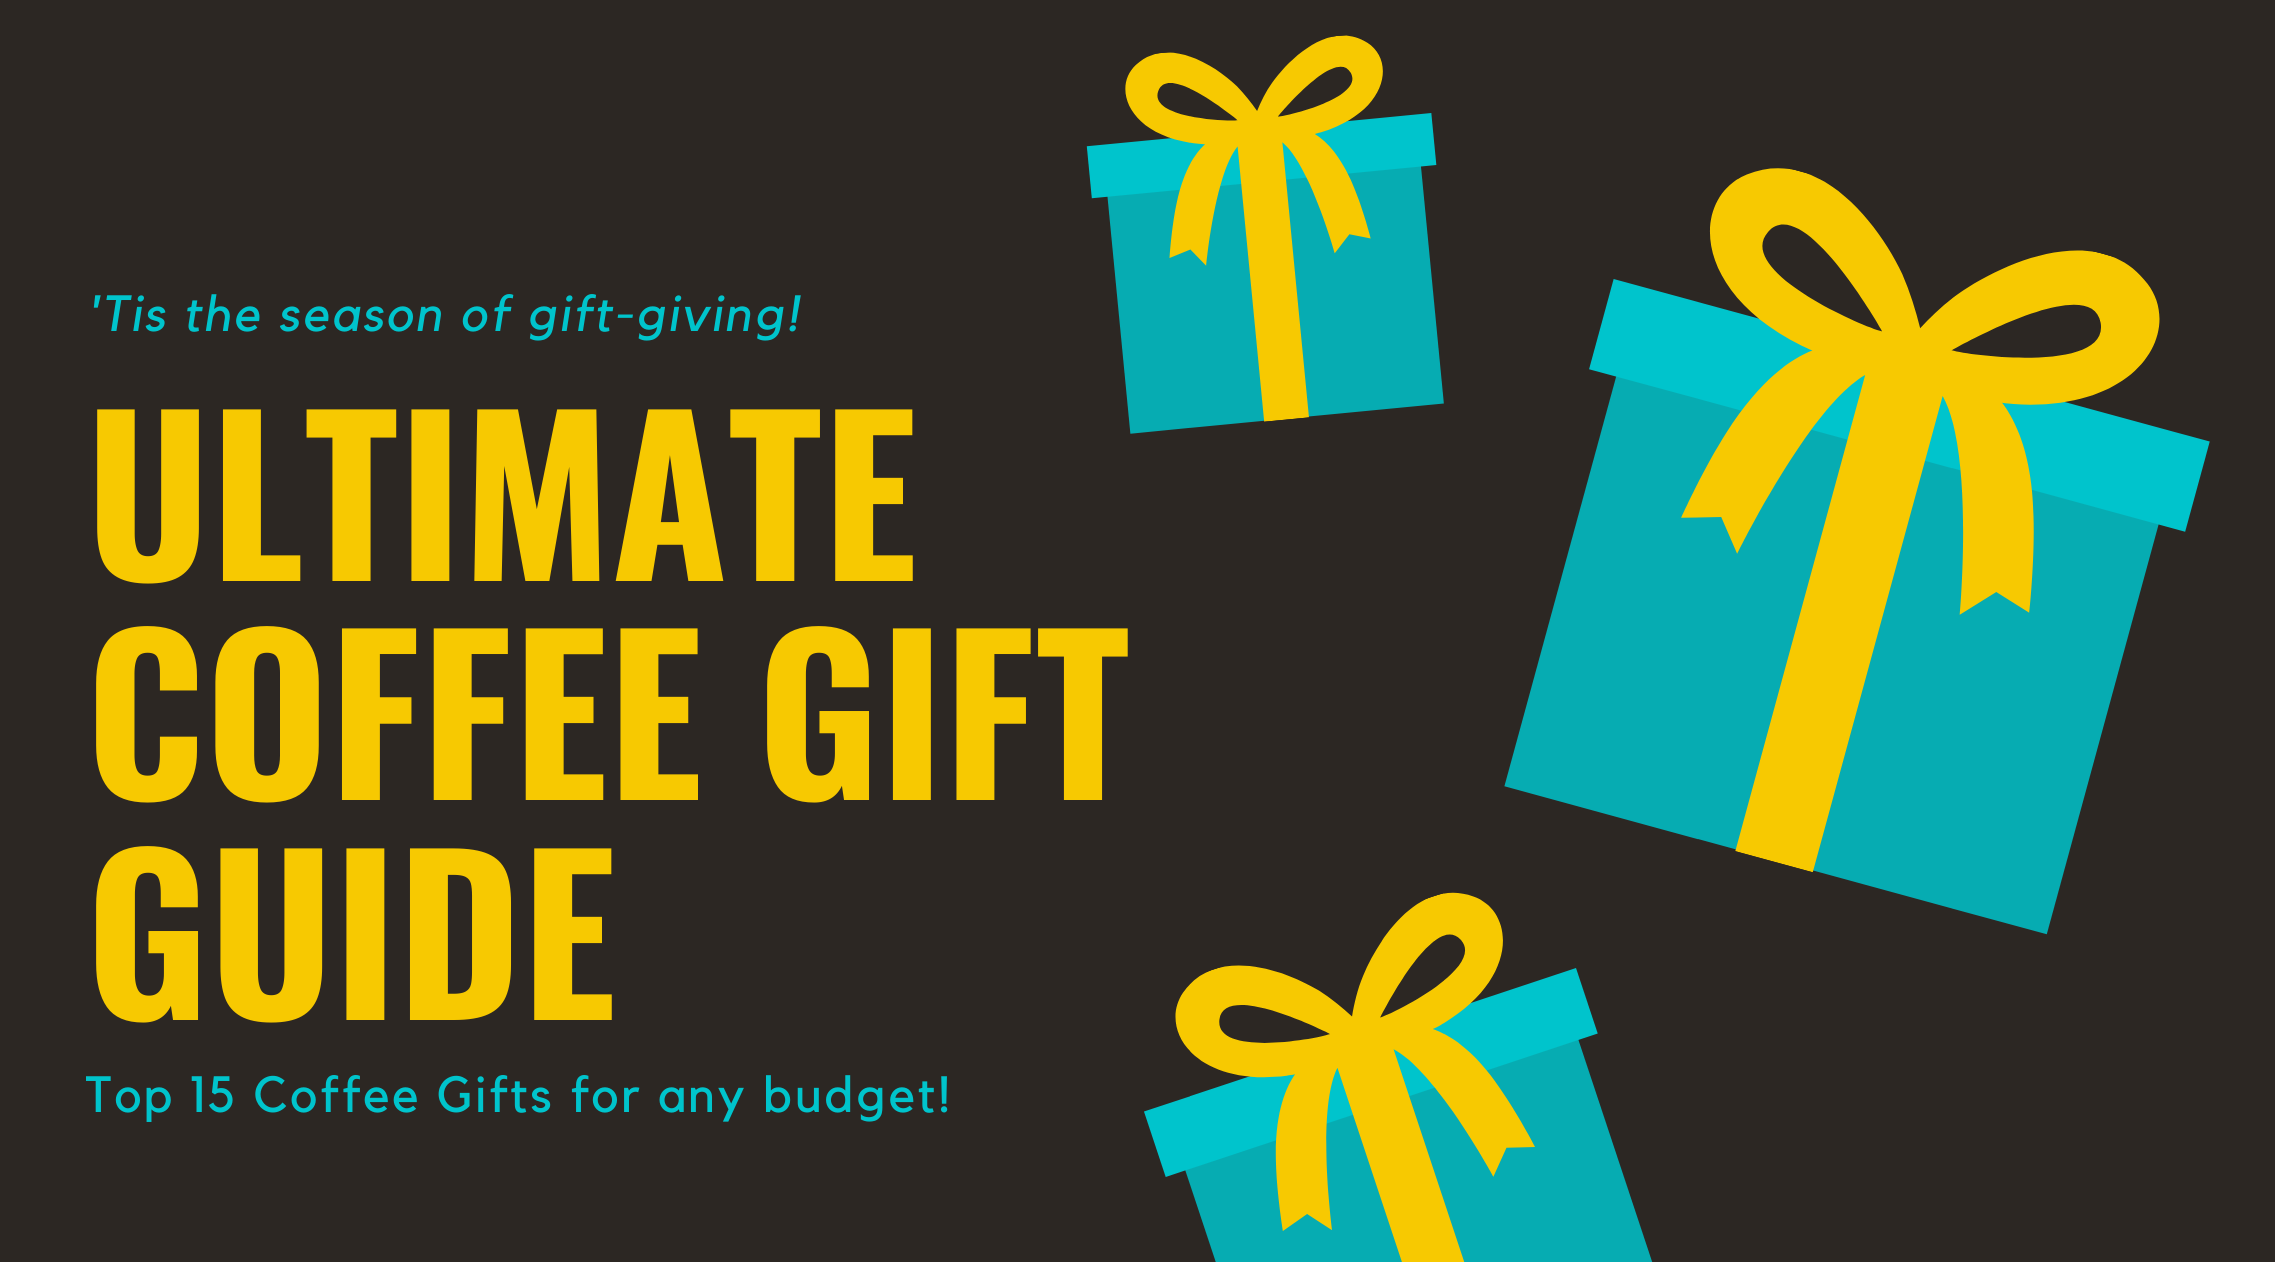 The ultimate coffee gift giving guide